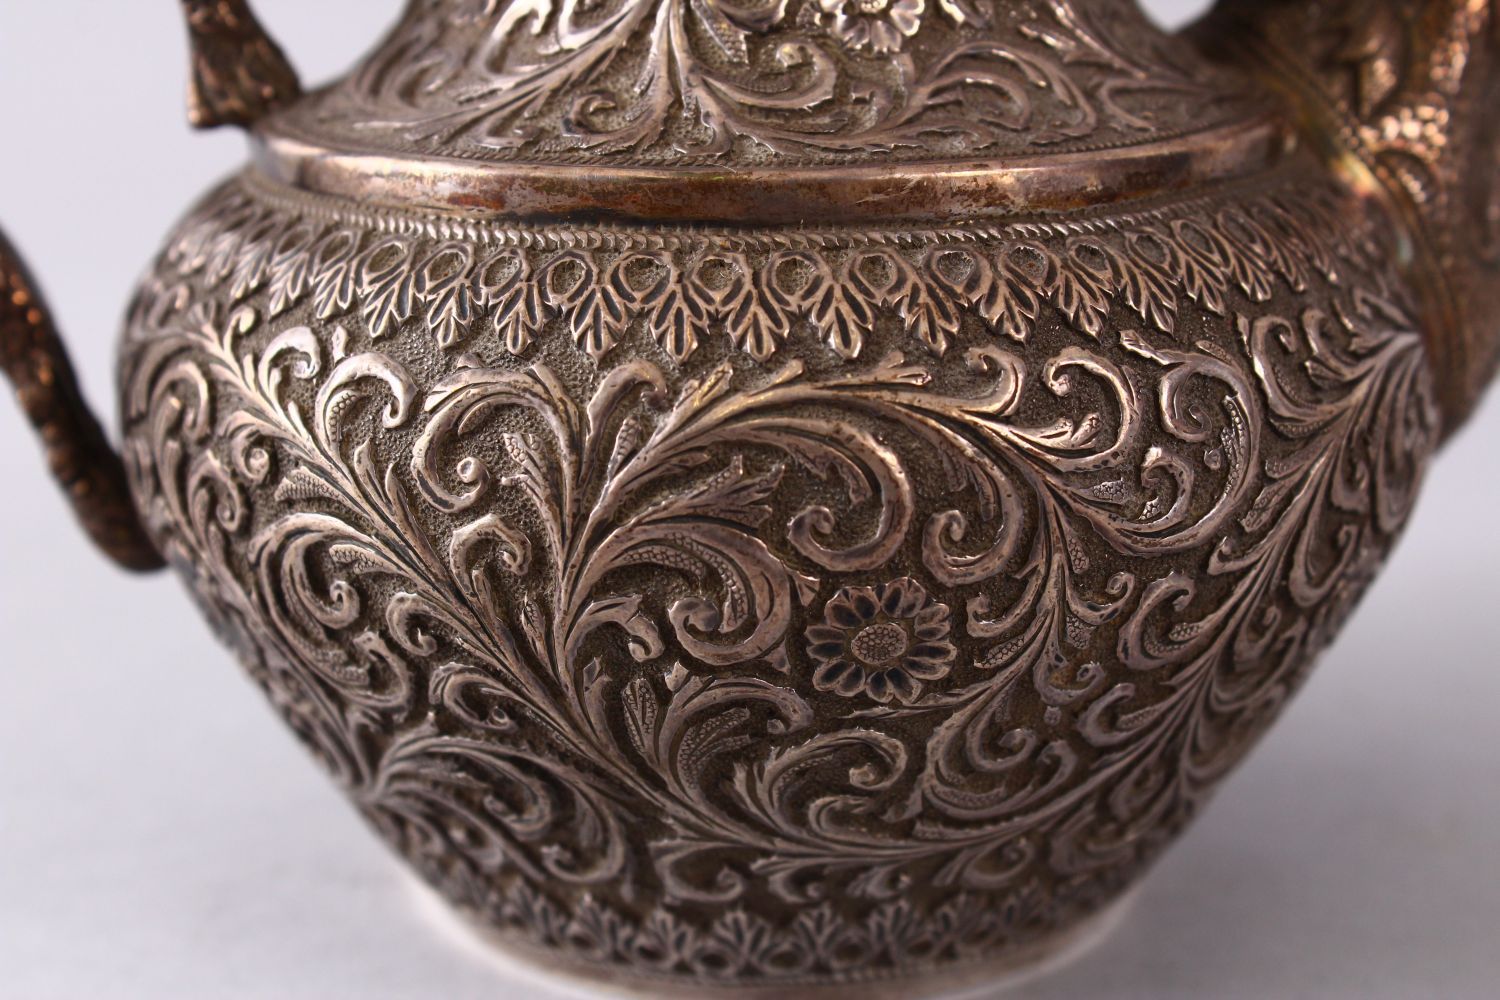 A GOOD 19TH CENTURY TURKISH SOLID SILVER TEAPOT carved with formal foliage and a dog style handle, - Image 9 of 10